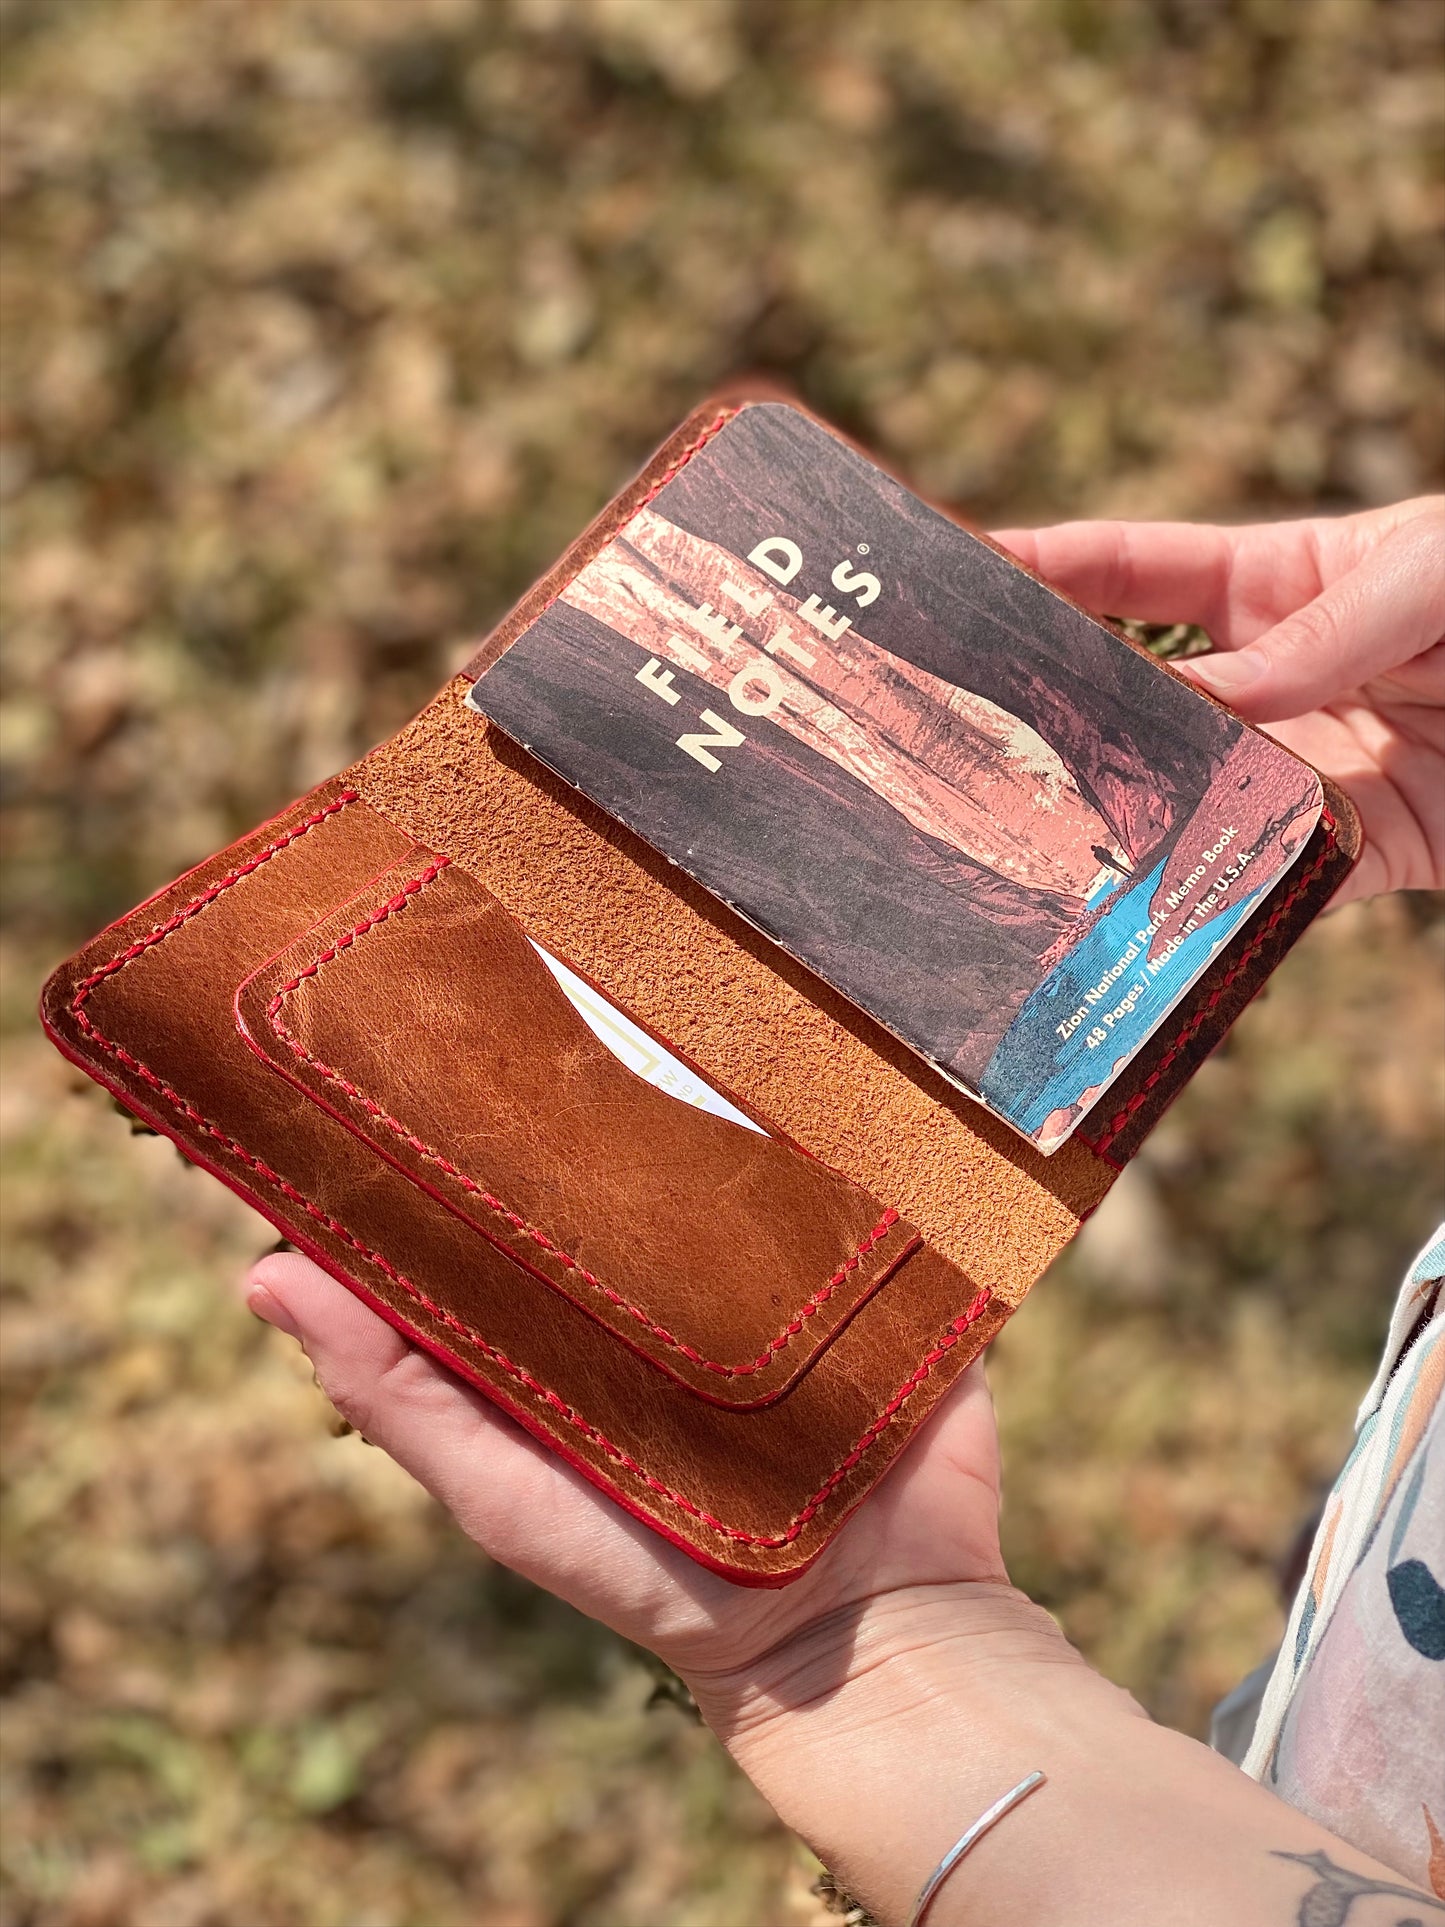 Kaiju Cut and Sew Field Notes/Passport Cover with Credit Card Pocket | Brown Horween Leather | Handmade in Austin, Texas